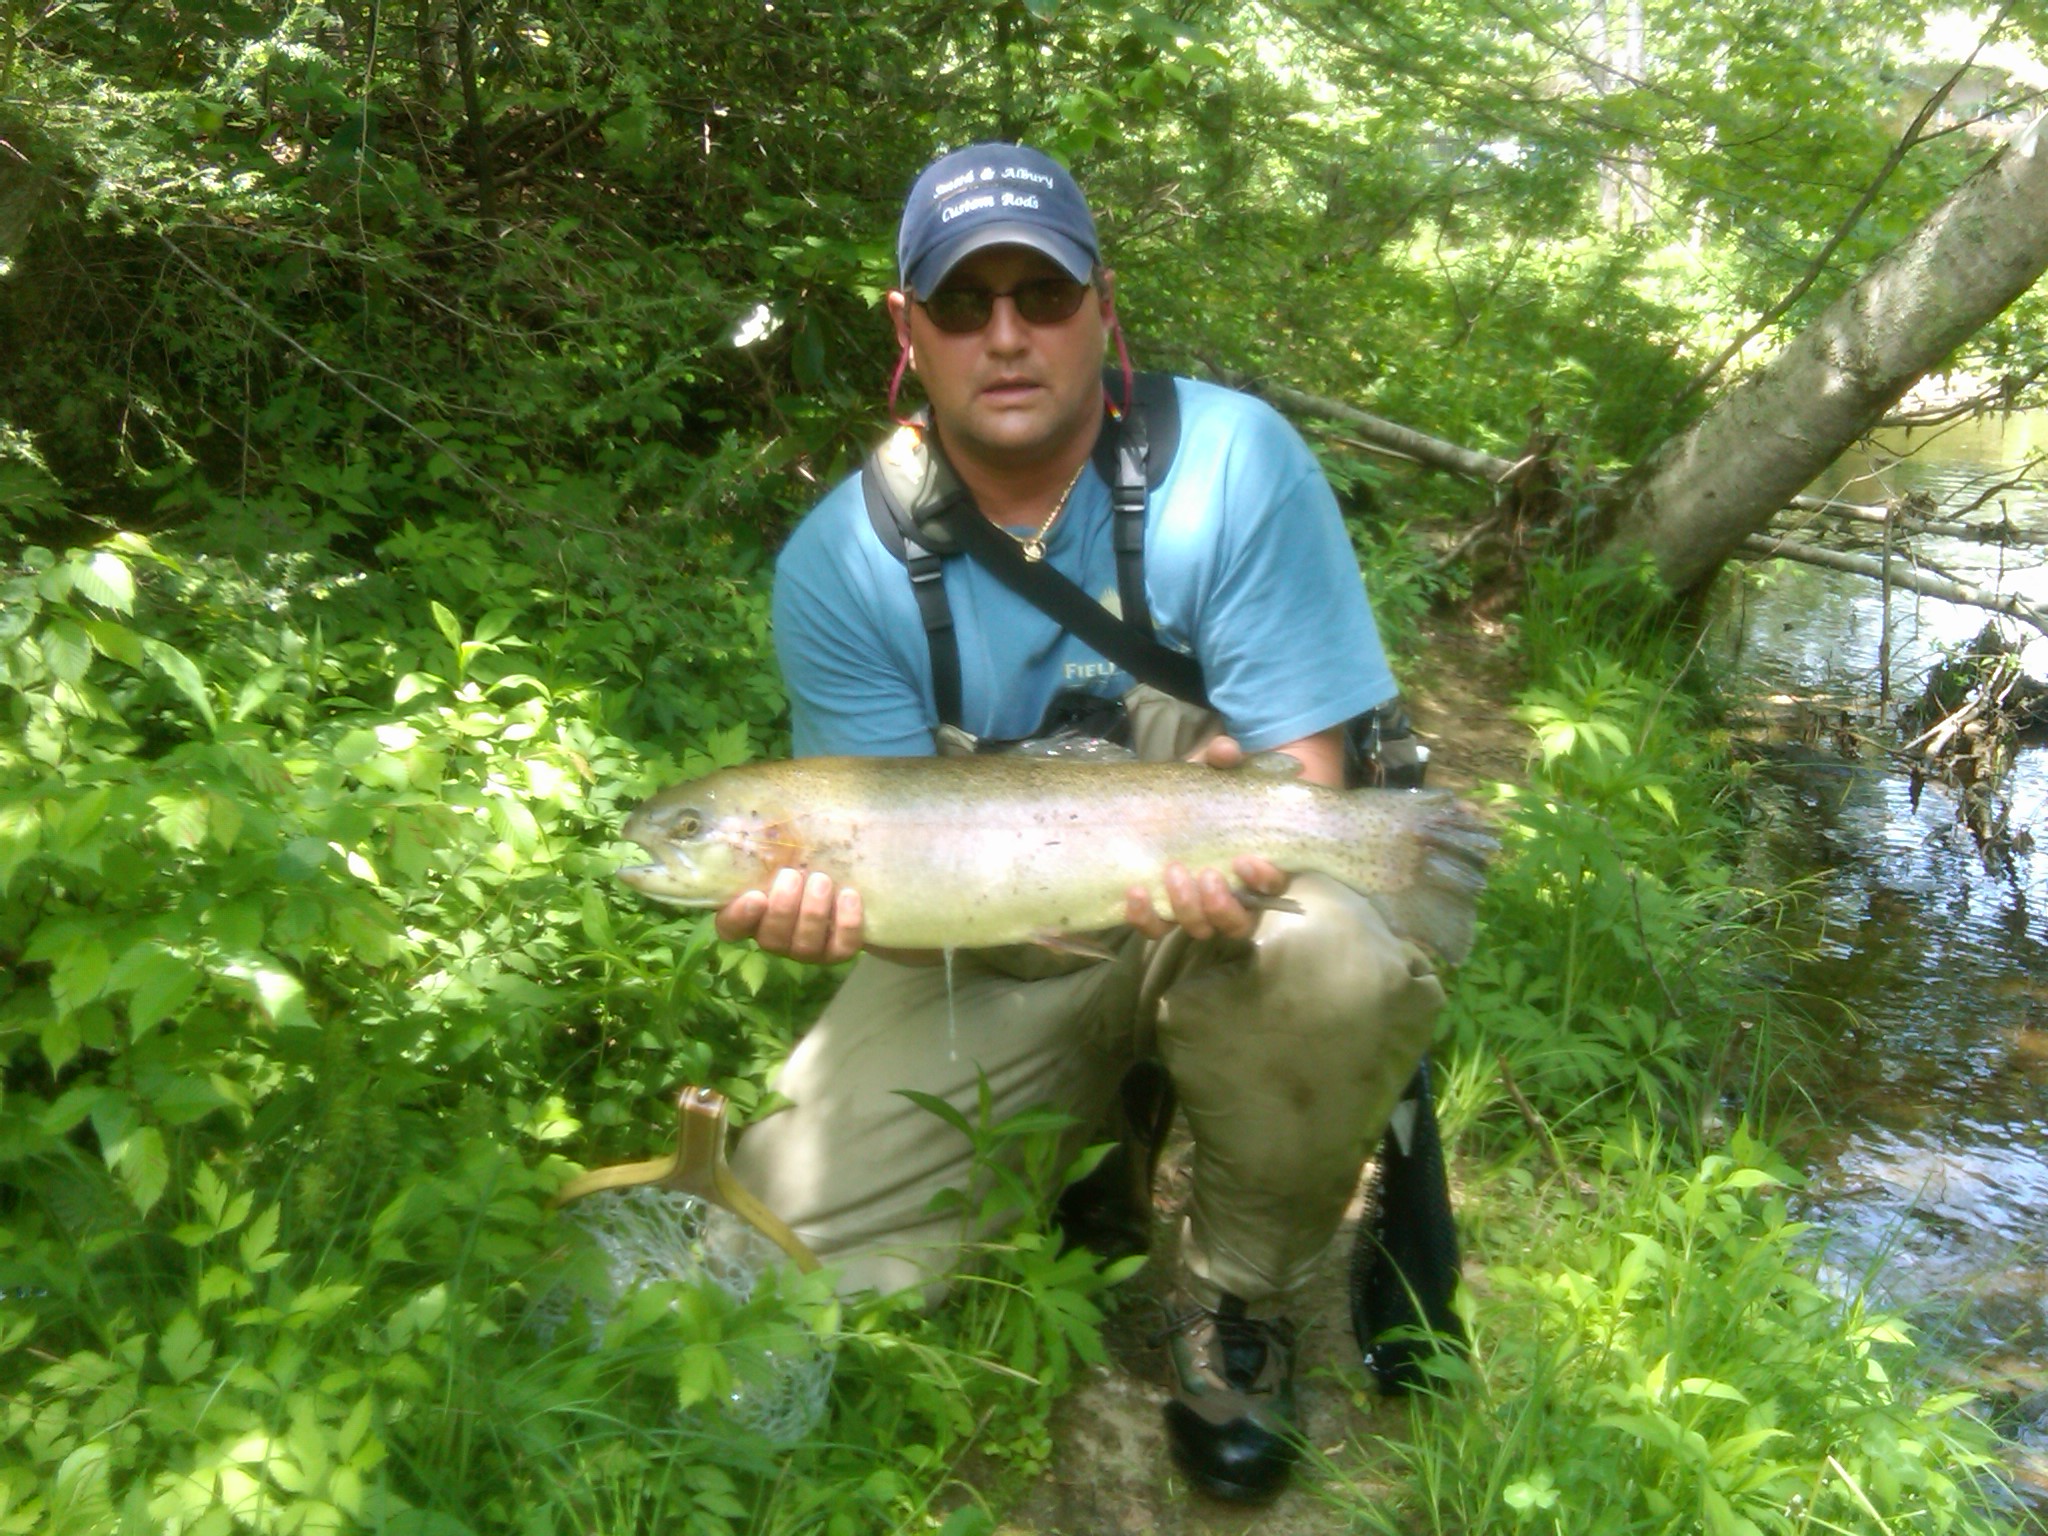 Steve Ralls with a 26" 8lb Rainbow Trout on a 3wt fly rod by Smith & Albury